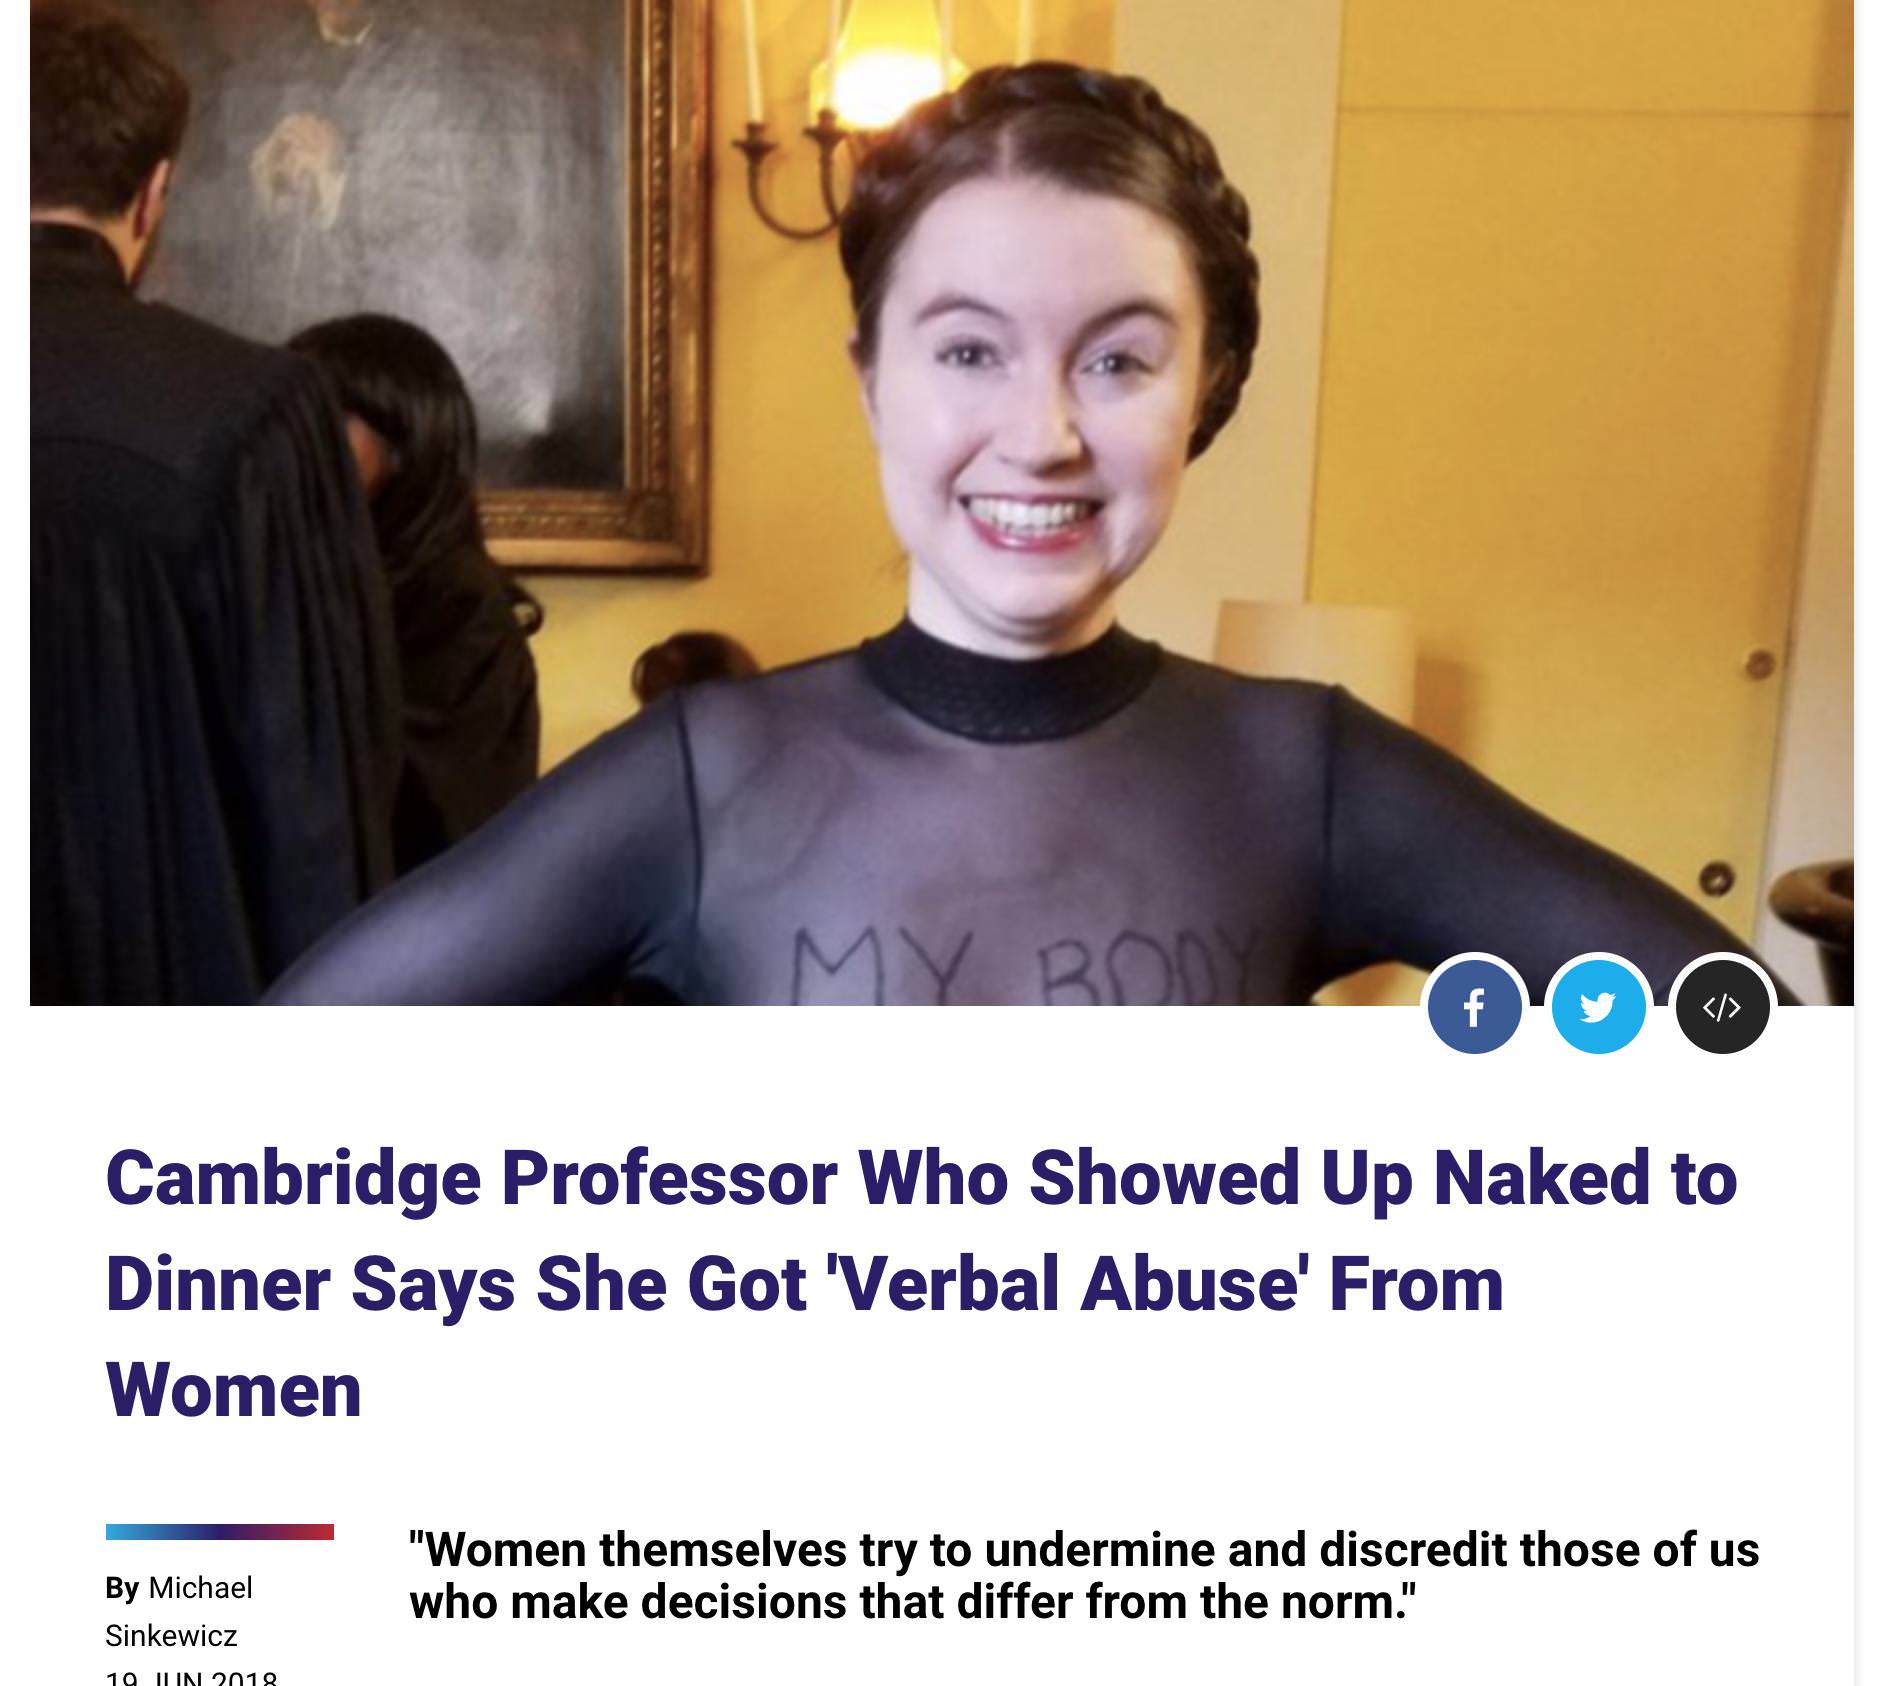 naked lecturer - My Bod Cambridge Professor Who Showed Up Naked to Dinner Says She Got 'Verbal Abuse' From Women By Michael Sinkewicz "Women themselves try to undermine and discredit those of us who make decisions that differ from the norm." 19 Juin 2018